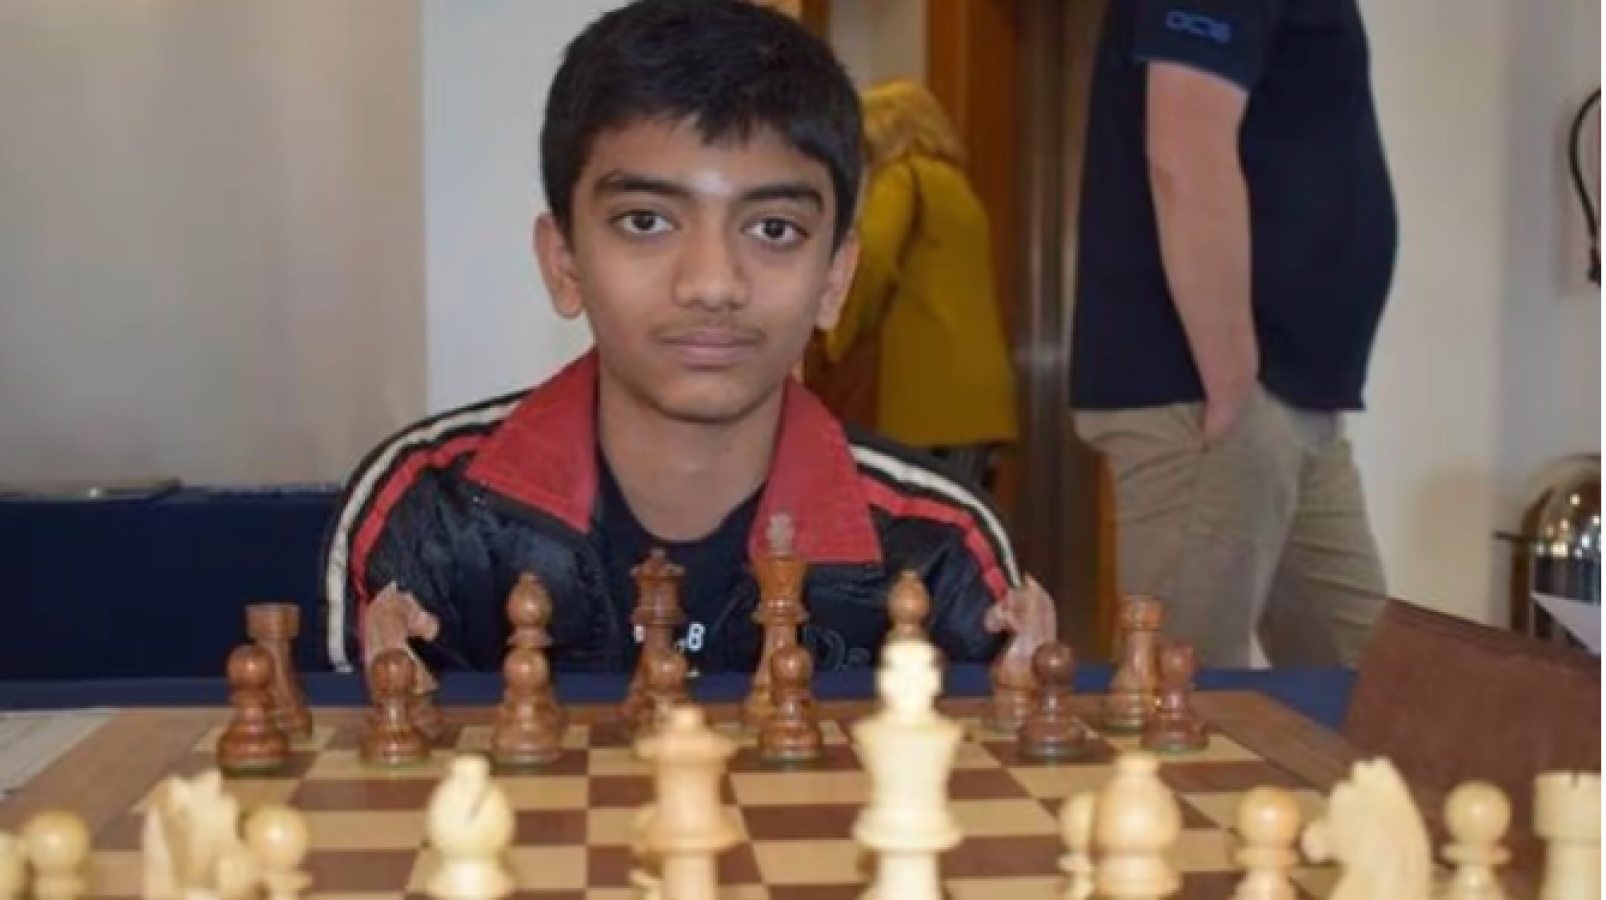 Chess Olympiad: India 'B' team wins bronze in Open section - The Week